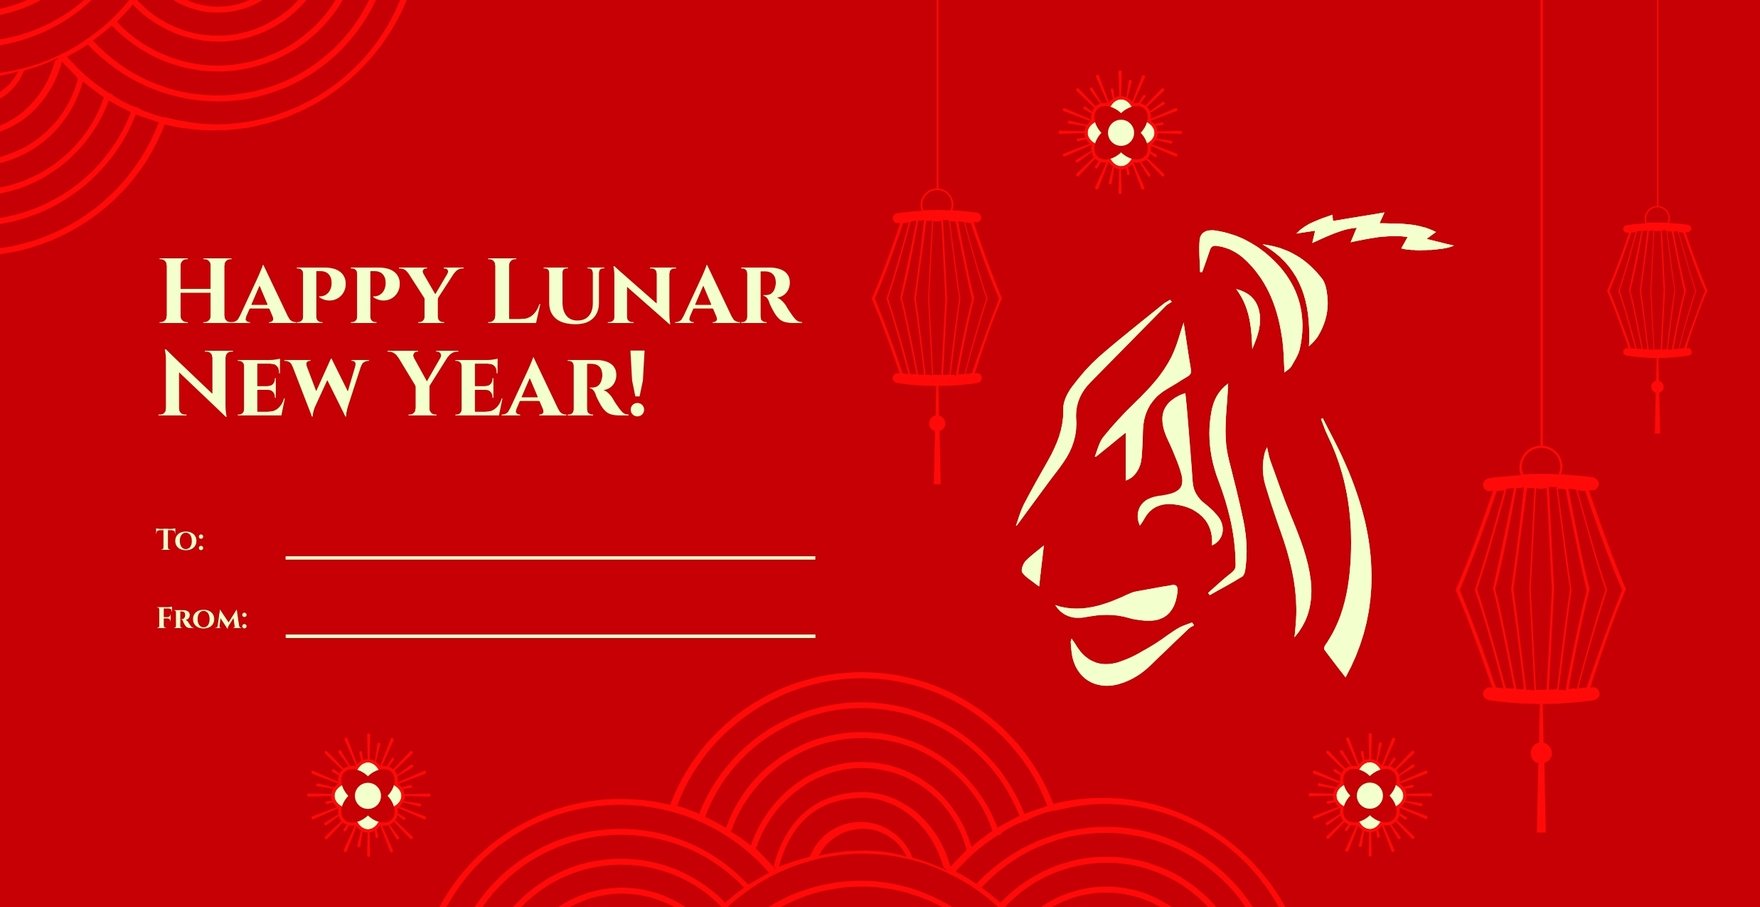 Free Lunar New Year Gift Card Template